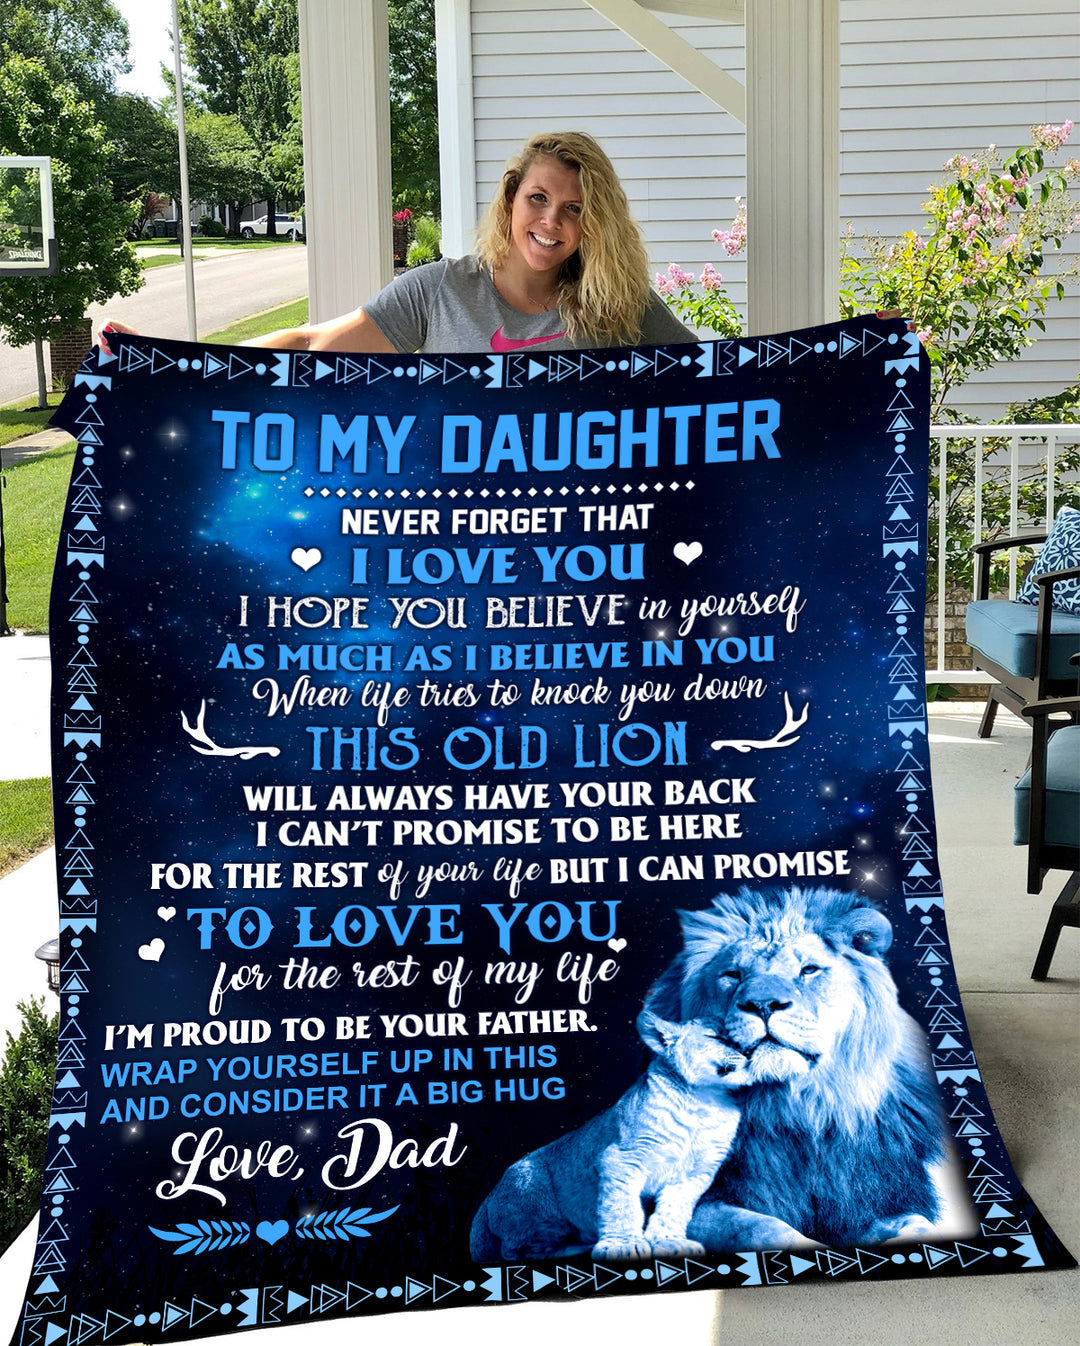 GREAT GIFT FOR YOUR PRECIOUS DAUGHTER, MSHM Premium Mink Sherpa Blanket 50x60